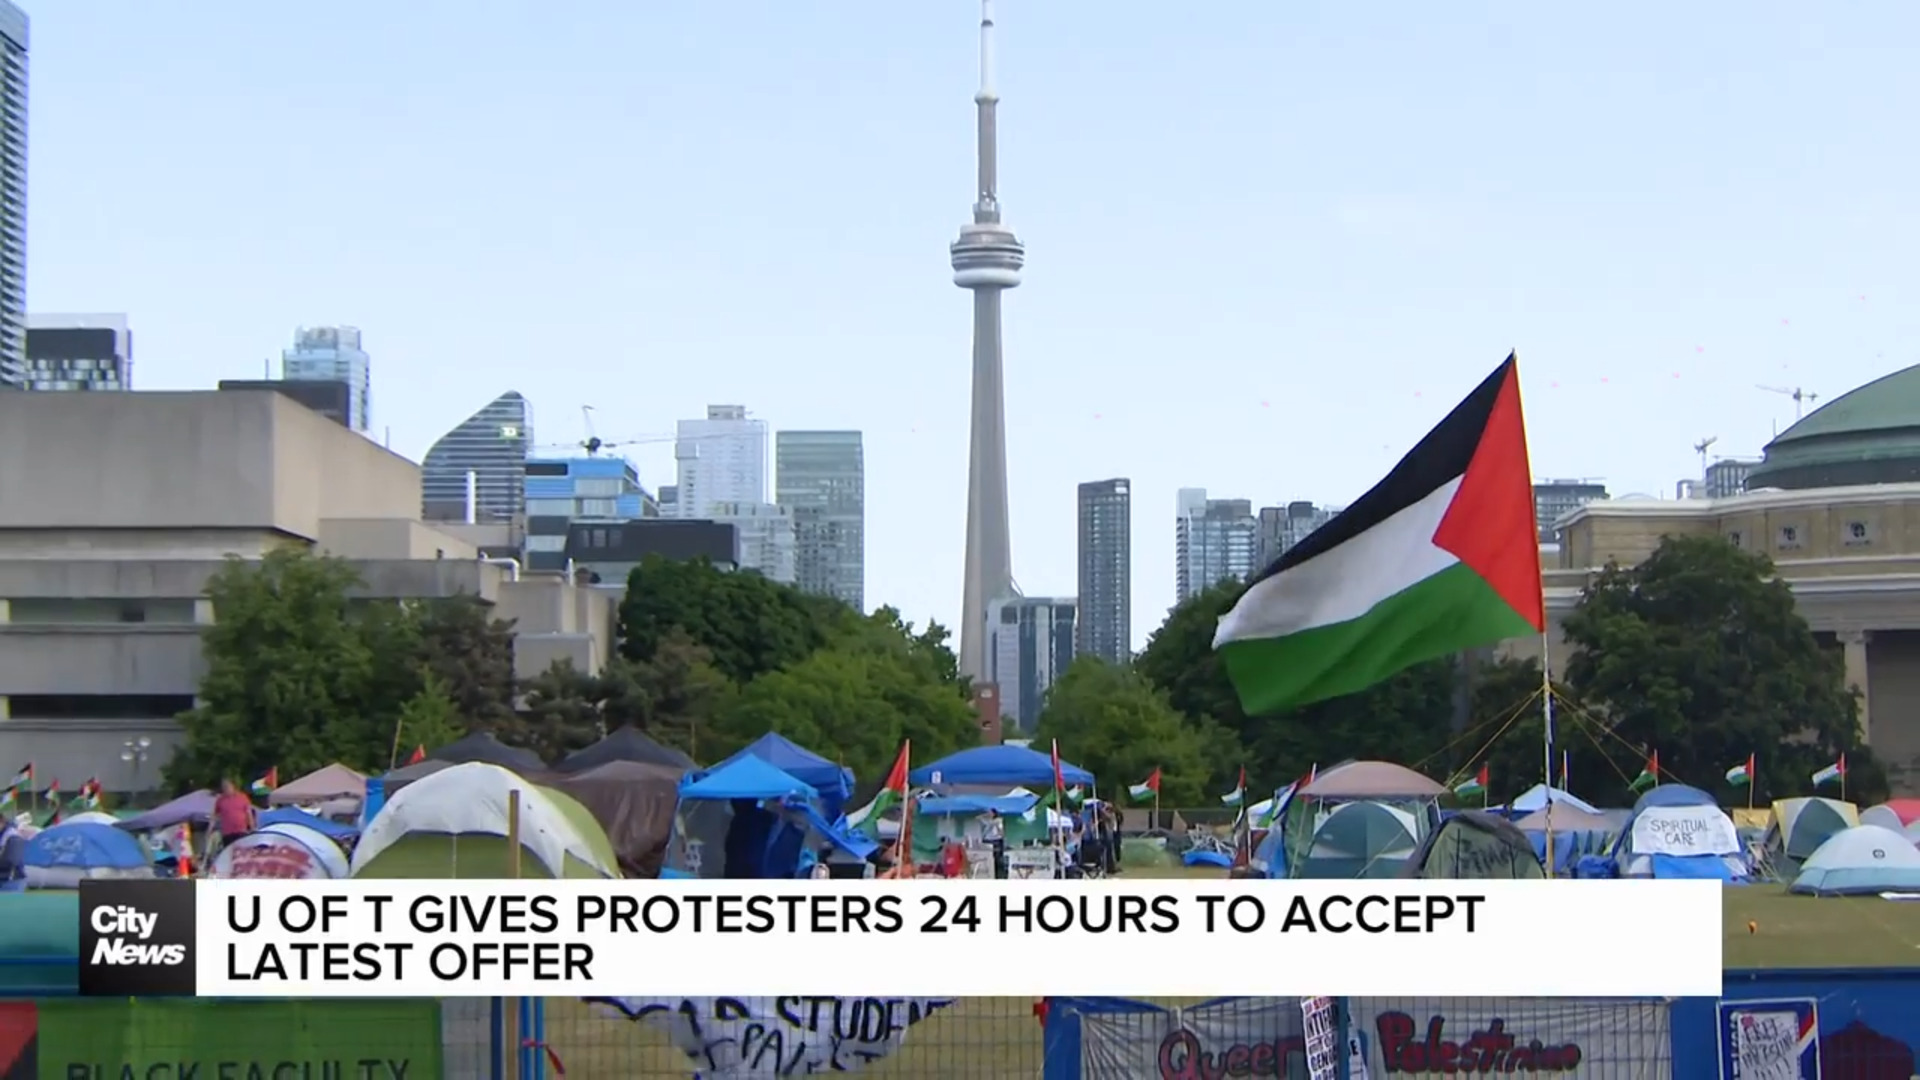 University of Toronto gives pro-Palestinian demonstrators 24 hours to consider latest offer to end encampment